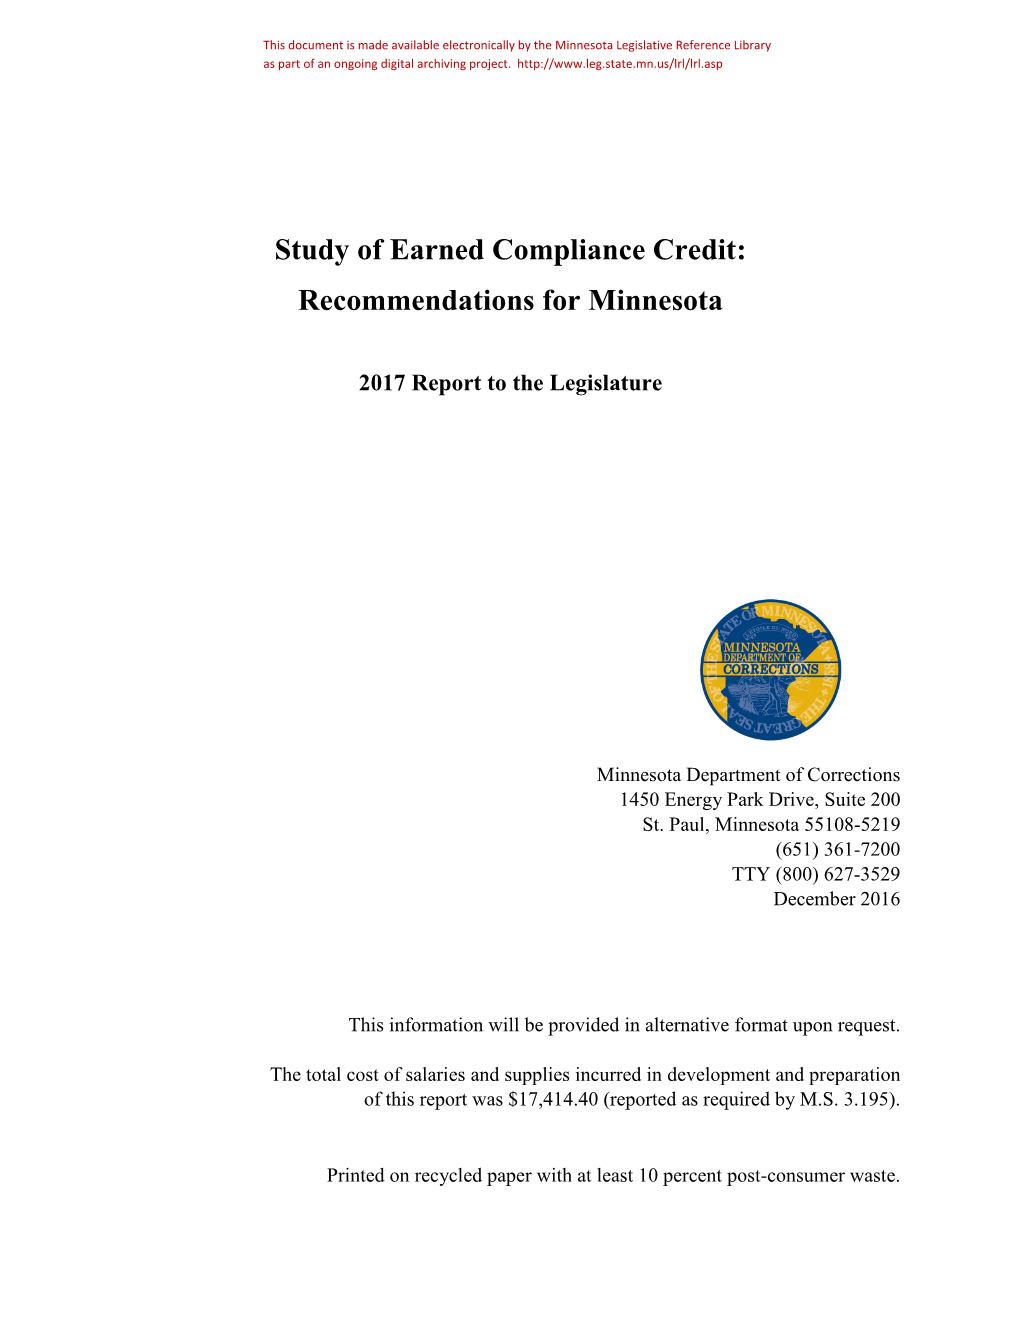 Study of Earned Compliance Credit: Recommendations for Minnesota